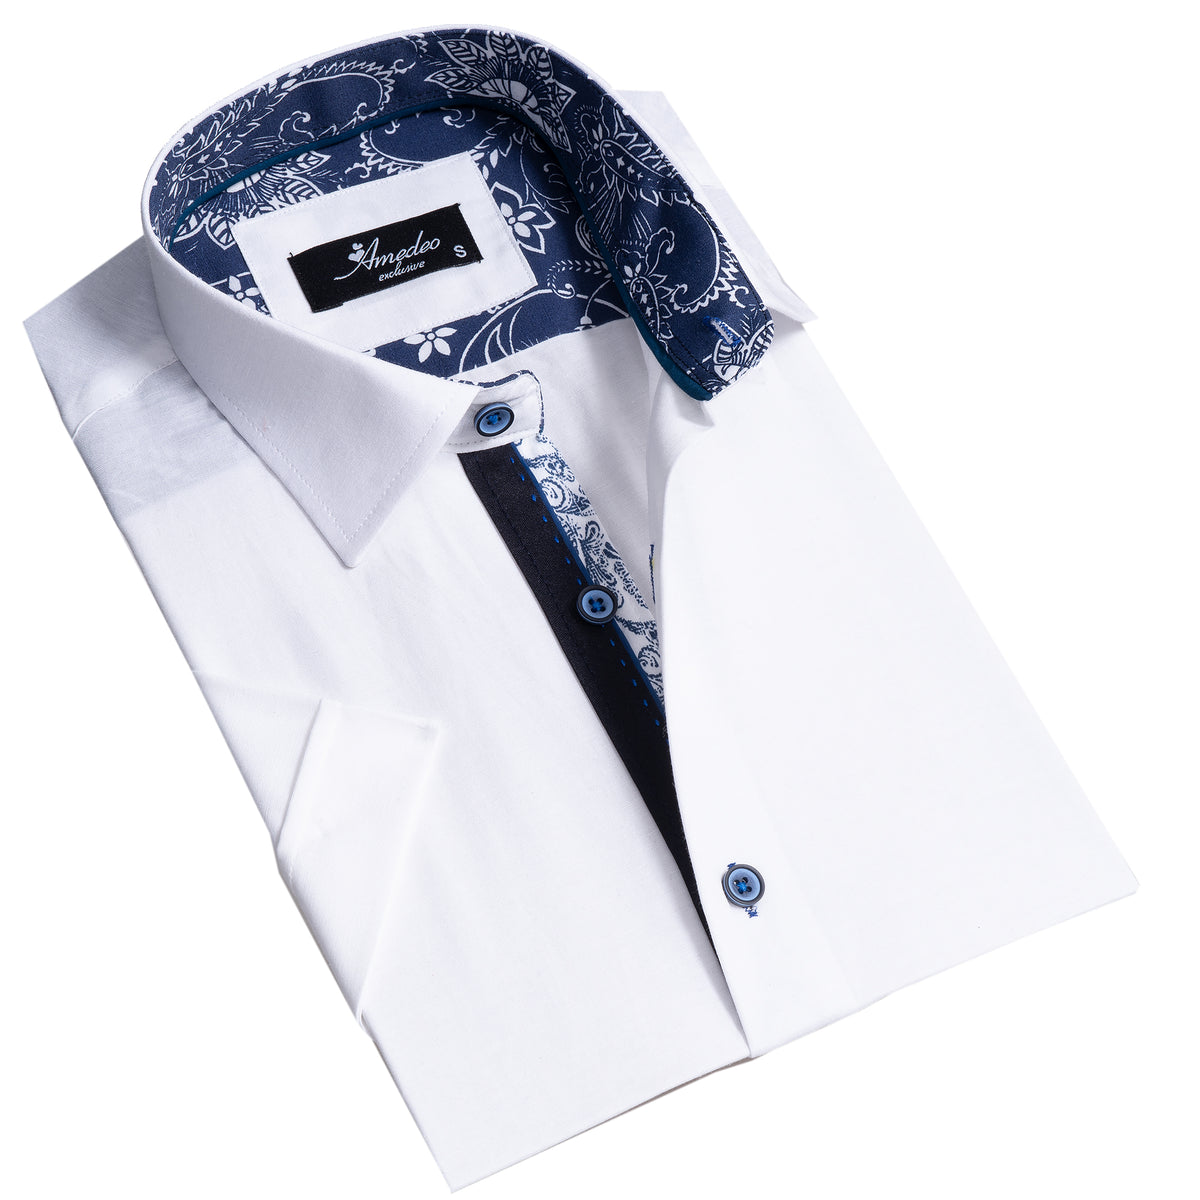 Solid White Mens Short Sleeve Button up Shirts - Tailored Slim Fit Cotton Dress Shirts